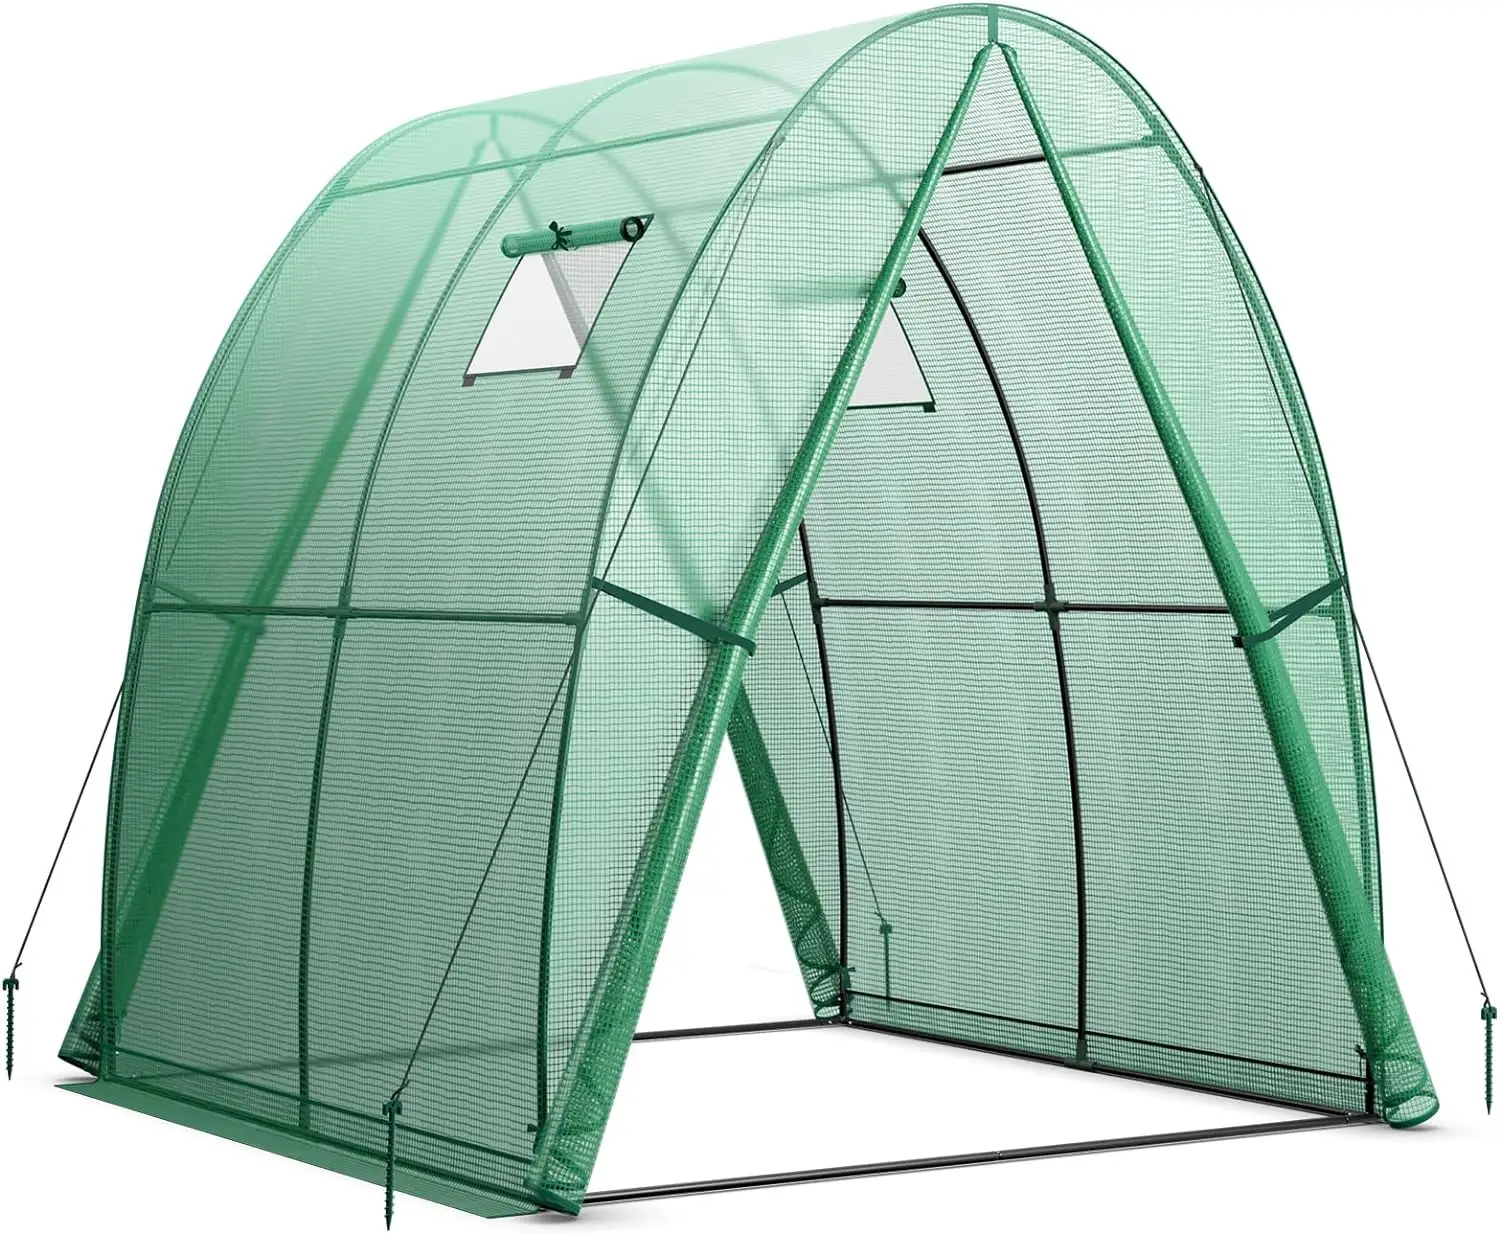 

6x6x6.6 FT Greenhouse, Outdoor Wall-in Tunnel Greenhouse with Ground Stakes, Rope, 2 Zippered Doors, 2 Roll-up Windows